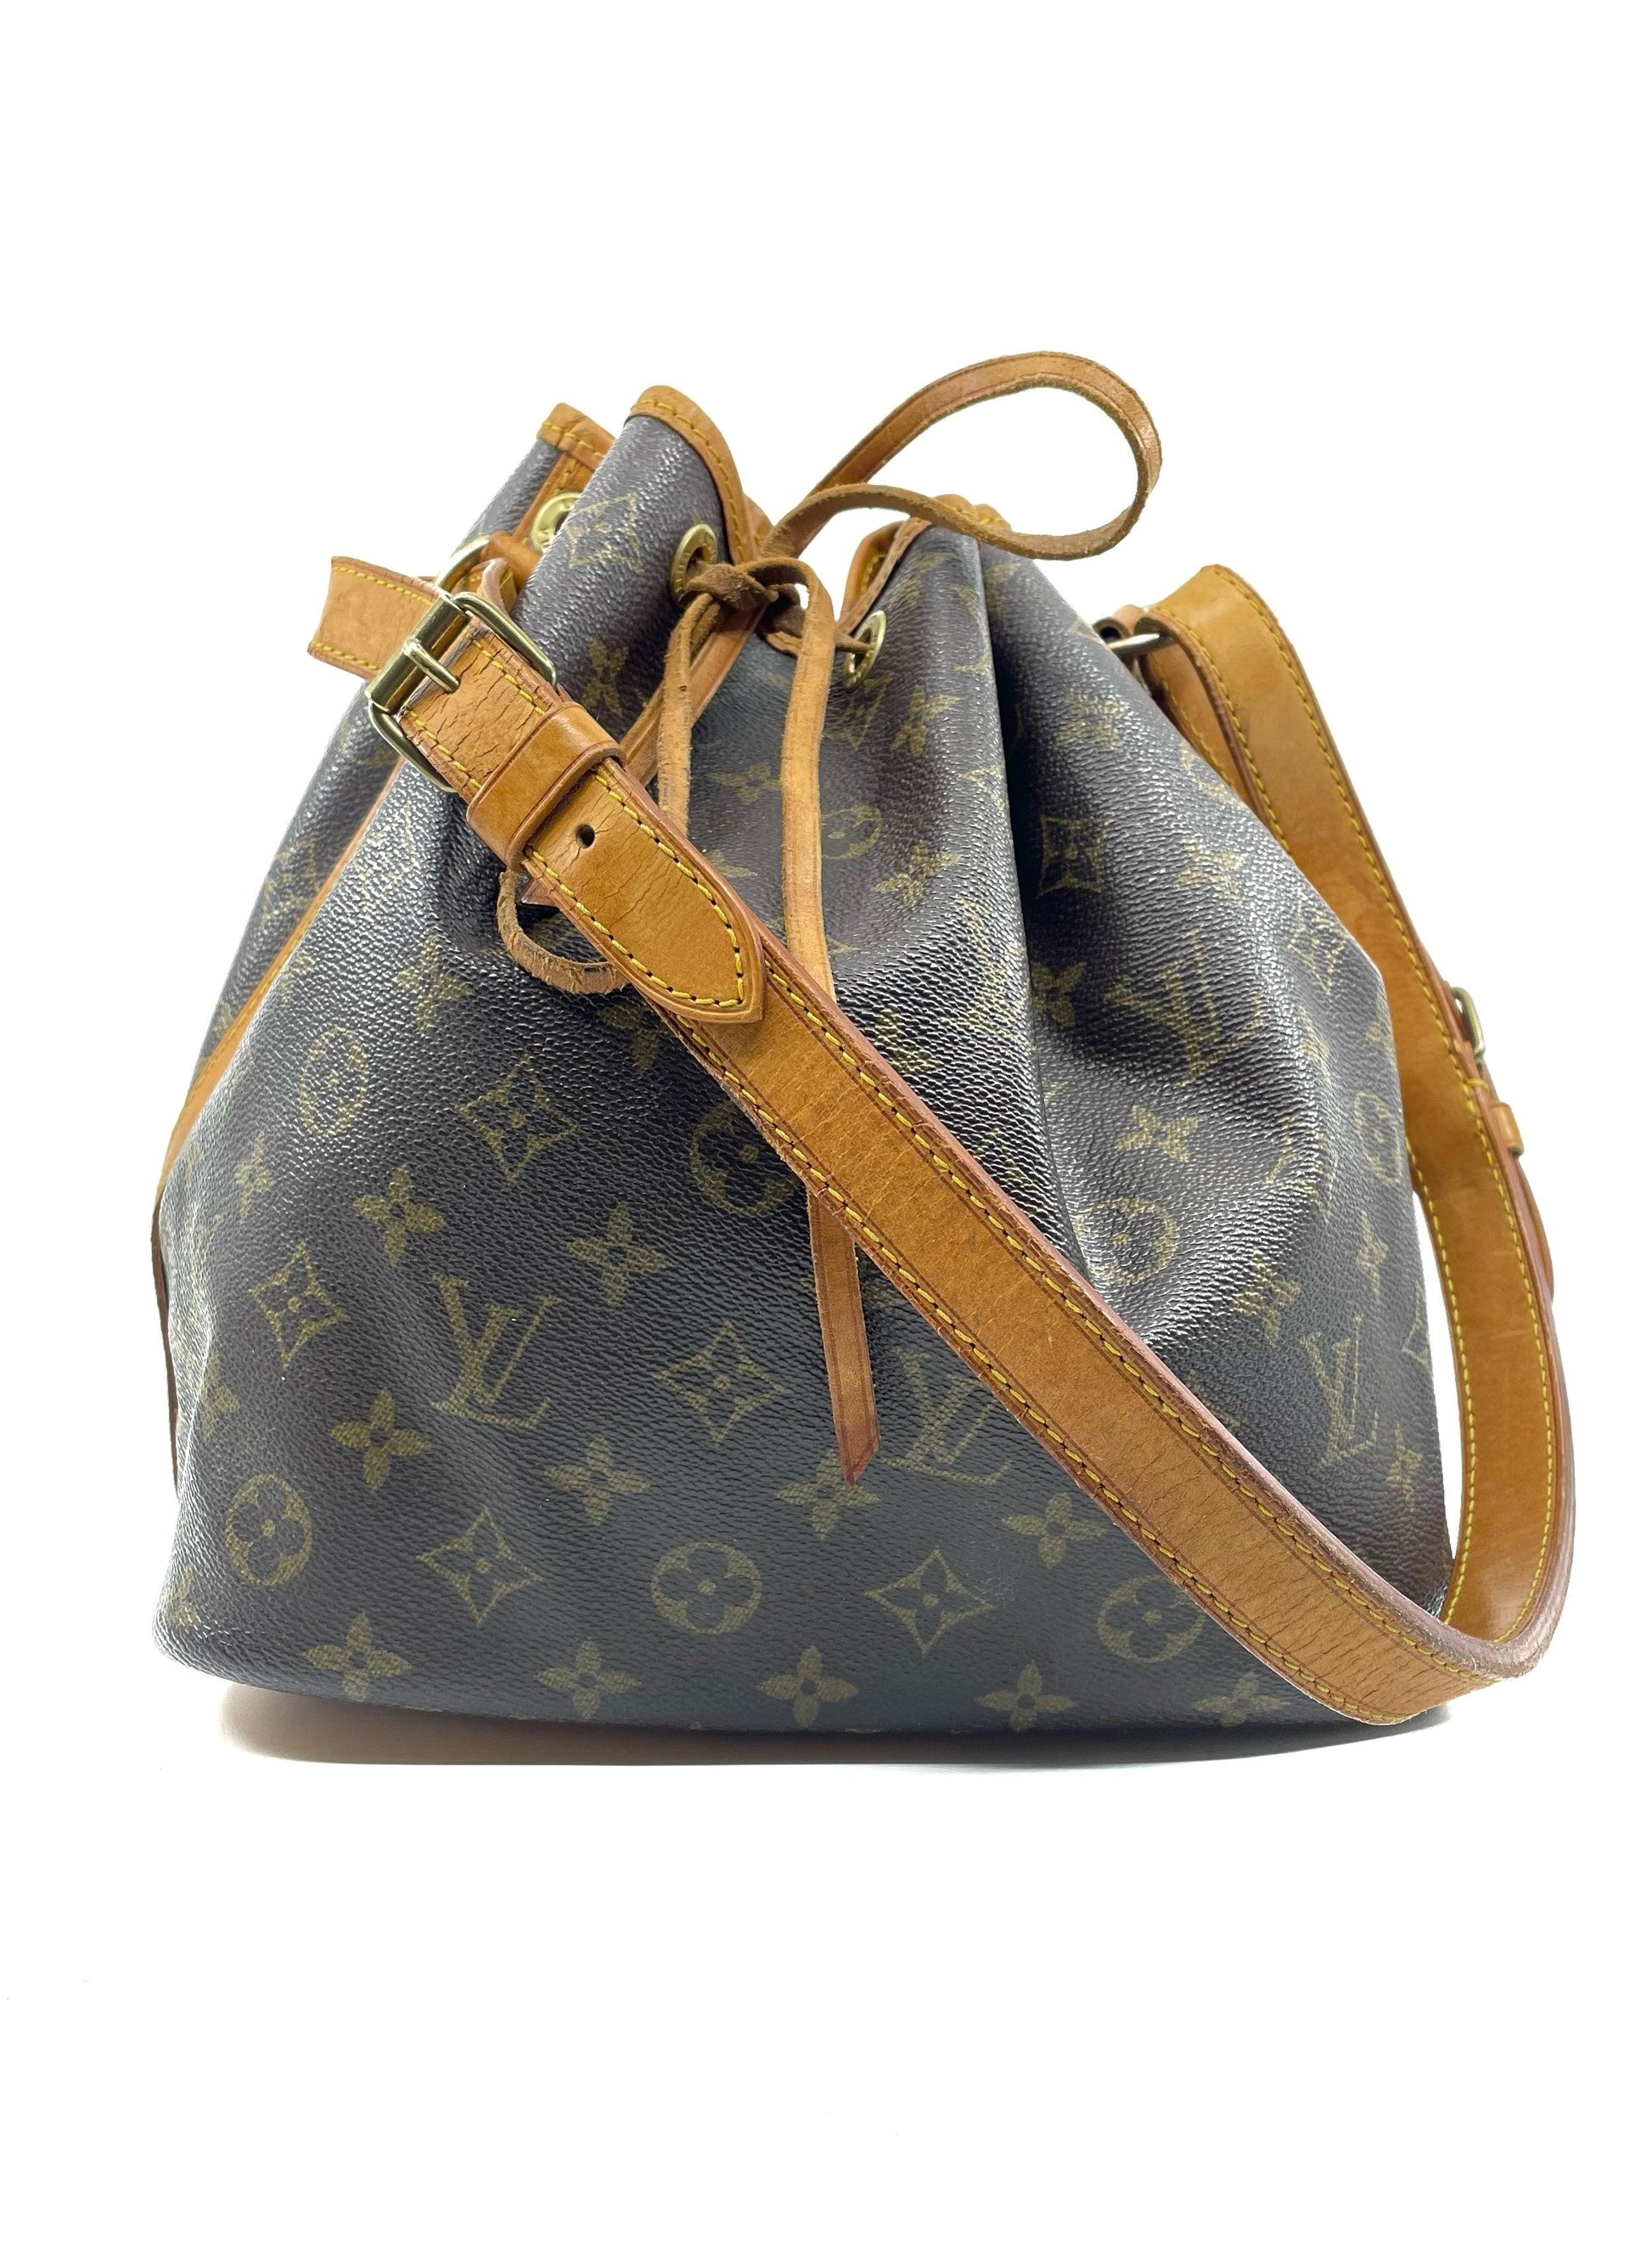 LOUIS VUITTON PETIT NOE, WHAT FITS IN MY BAG